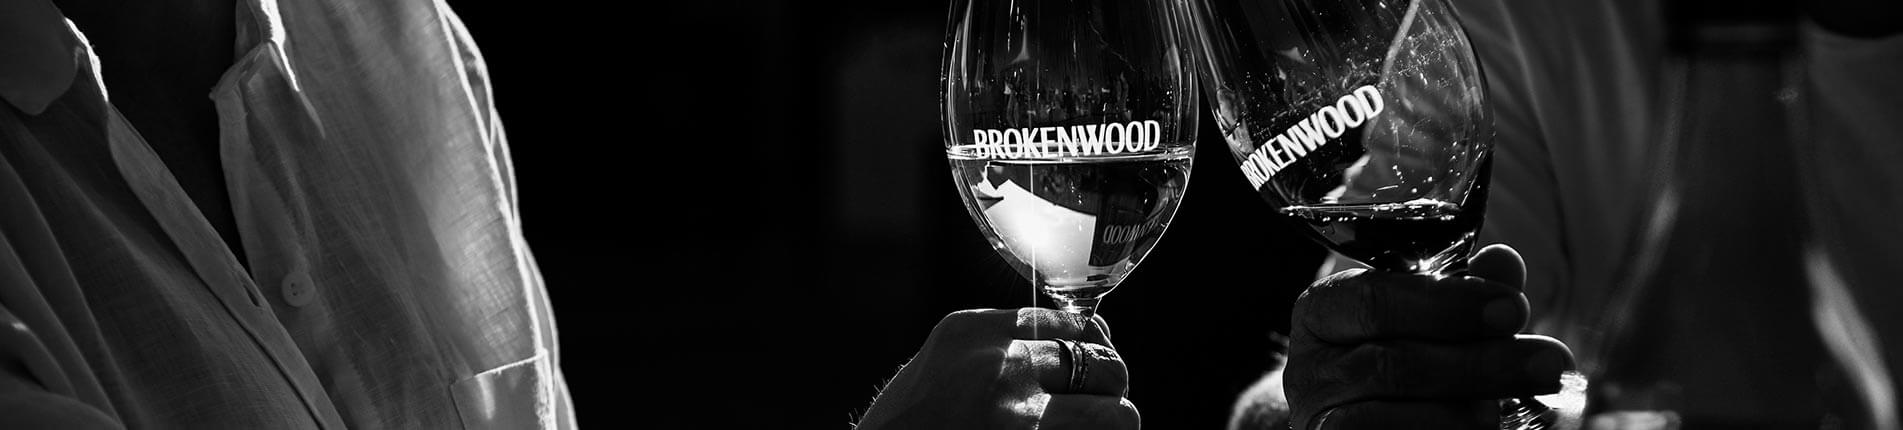 Subscribe to the Friends of Brokenwood Newsletter